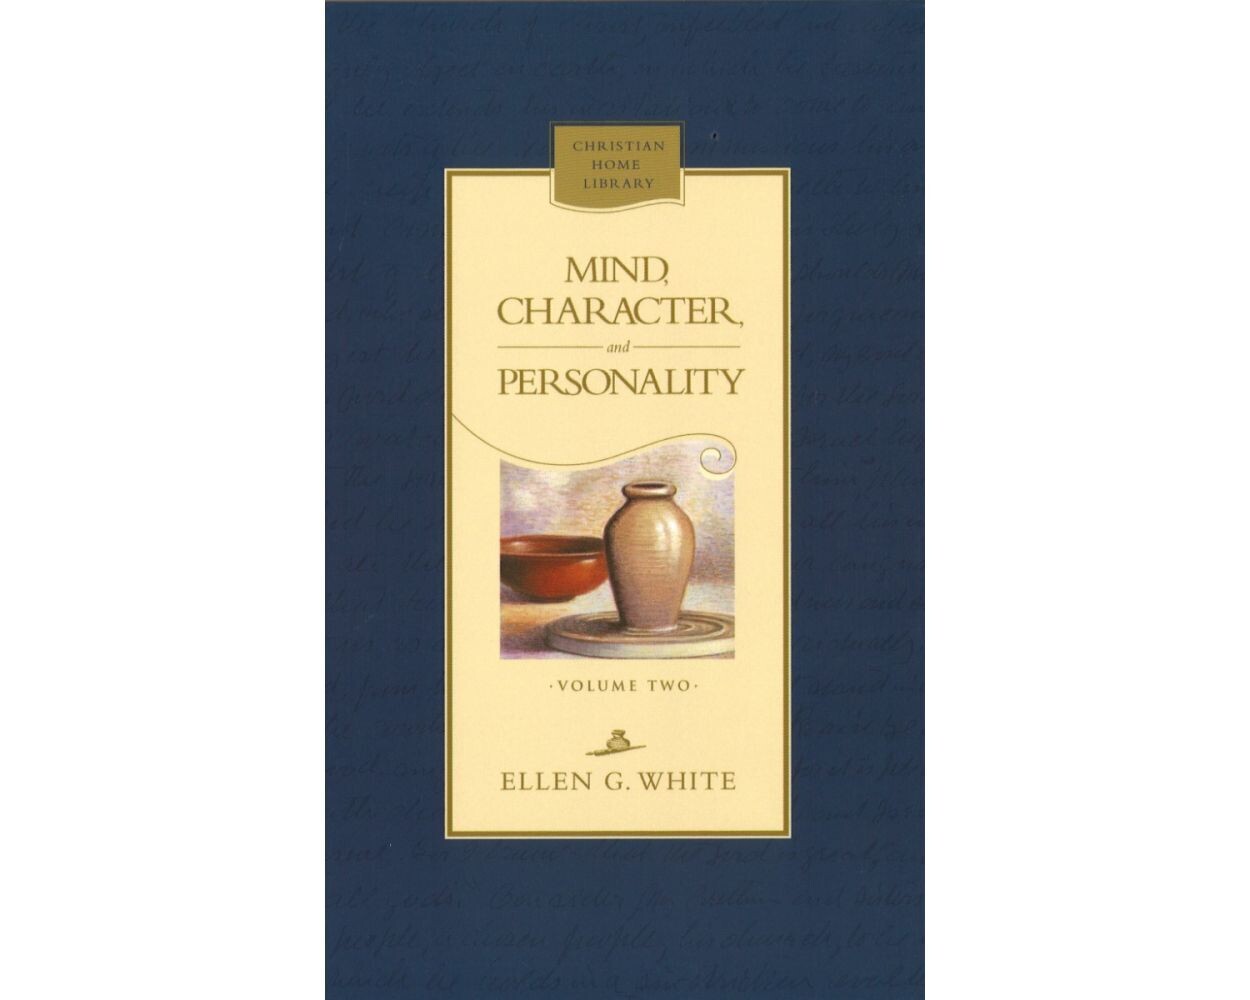 Mind, Character and Personality Volume 2 - EGW (D1)